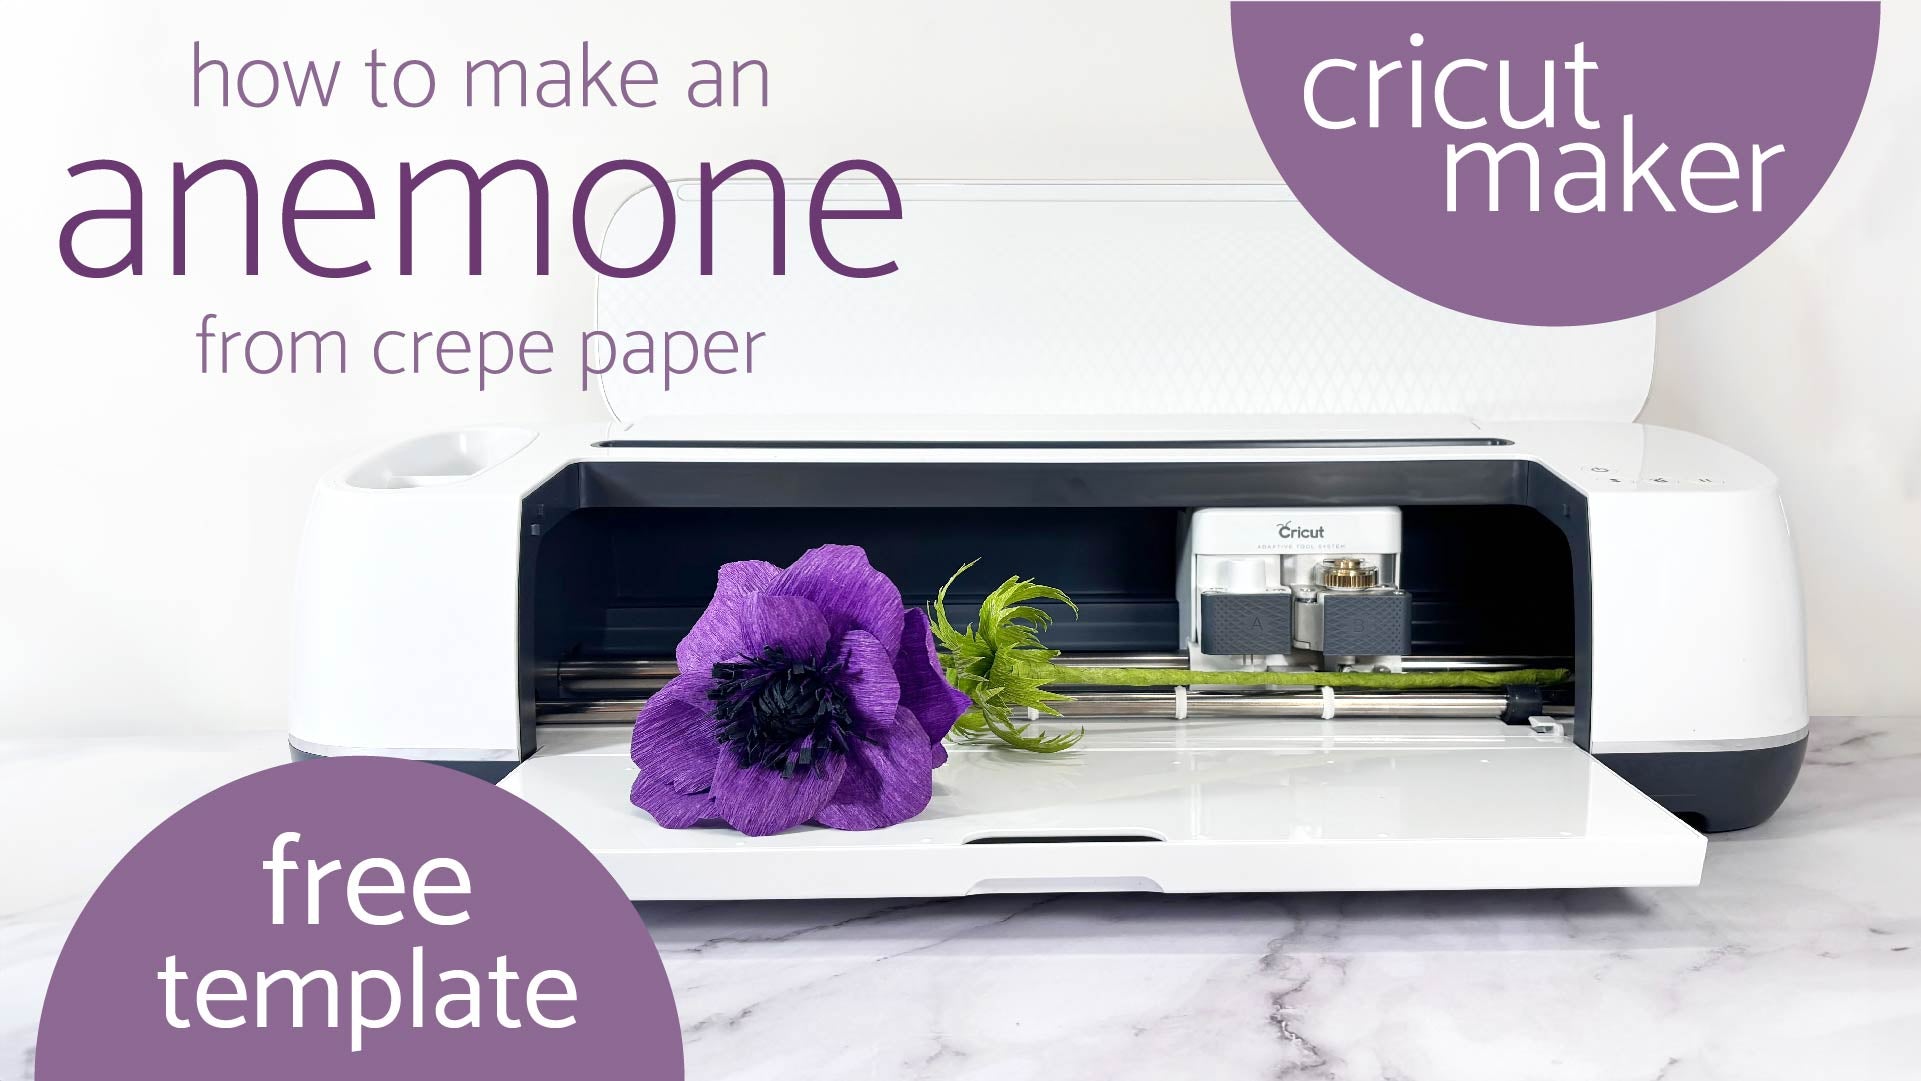 Load video: how to make an anemone from crepe paper using cricut maker